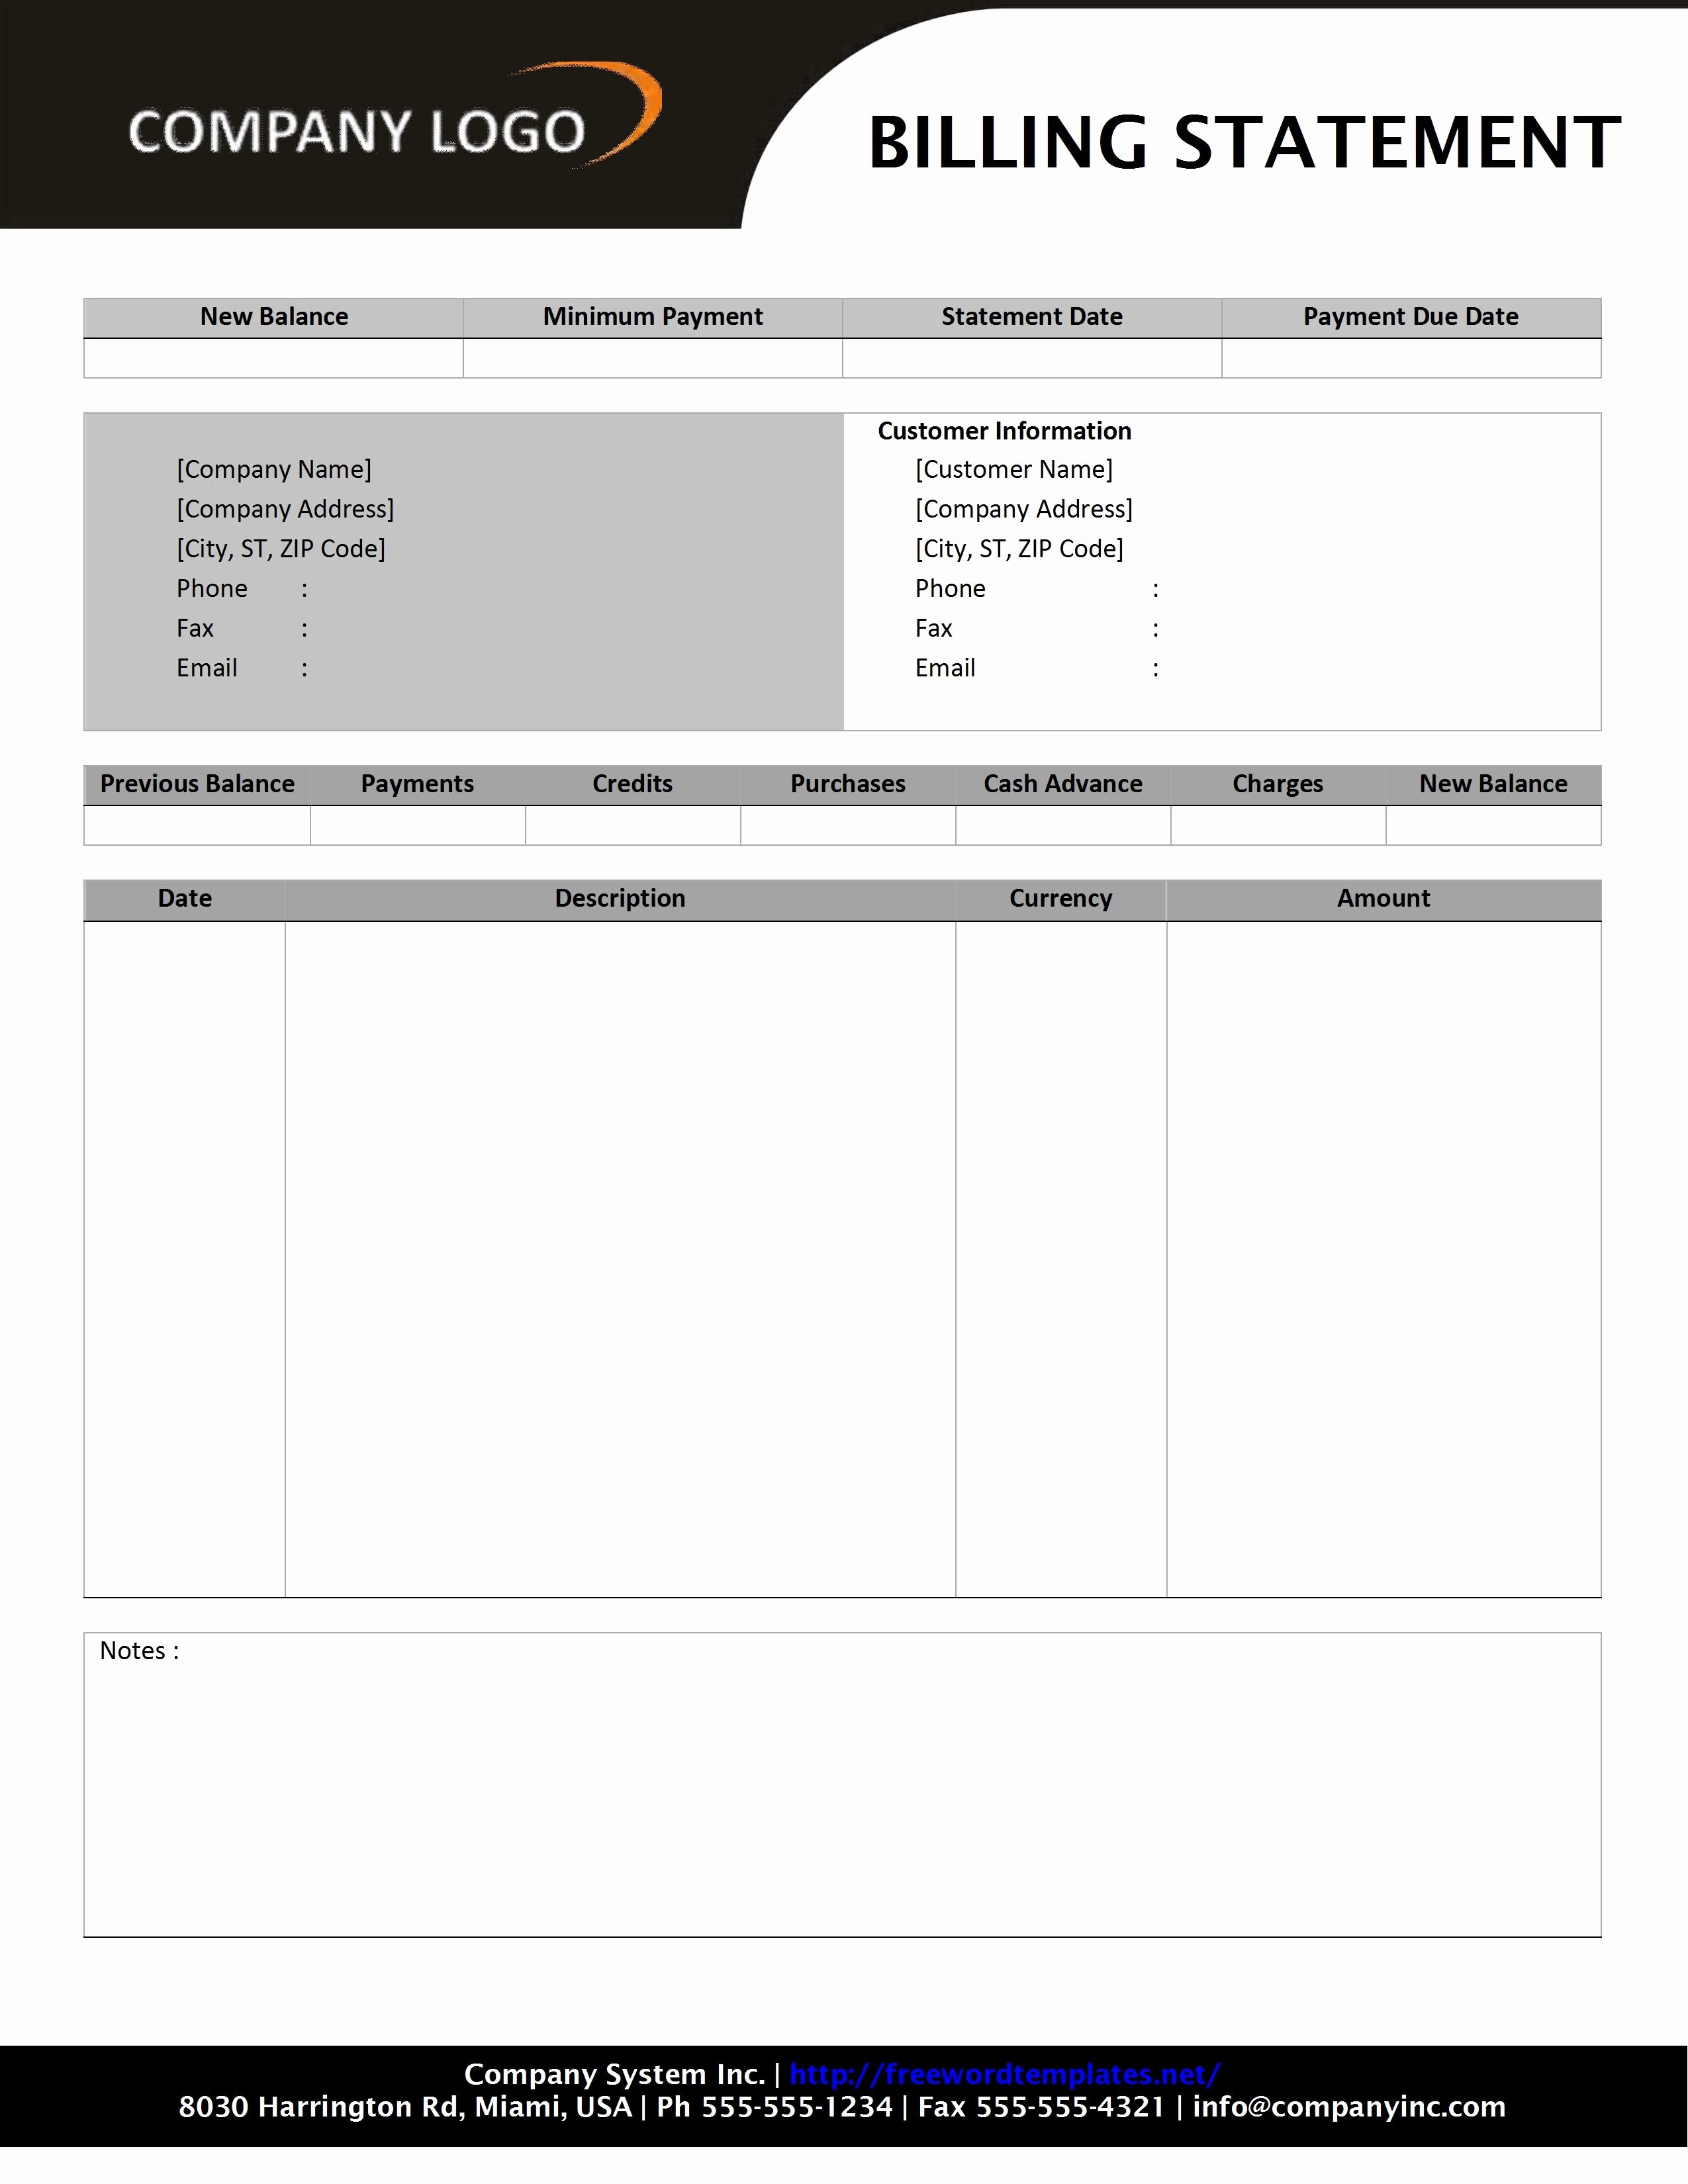 Billing Invoice Template Word New Sample Billing Statement Google Search